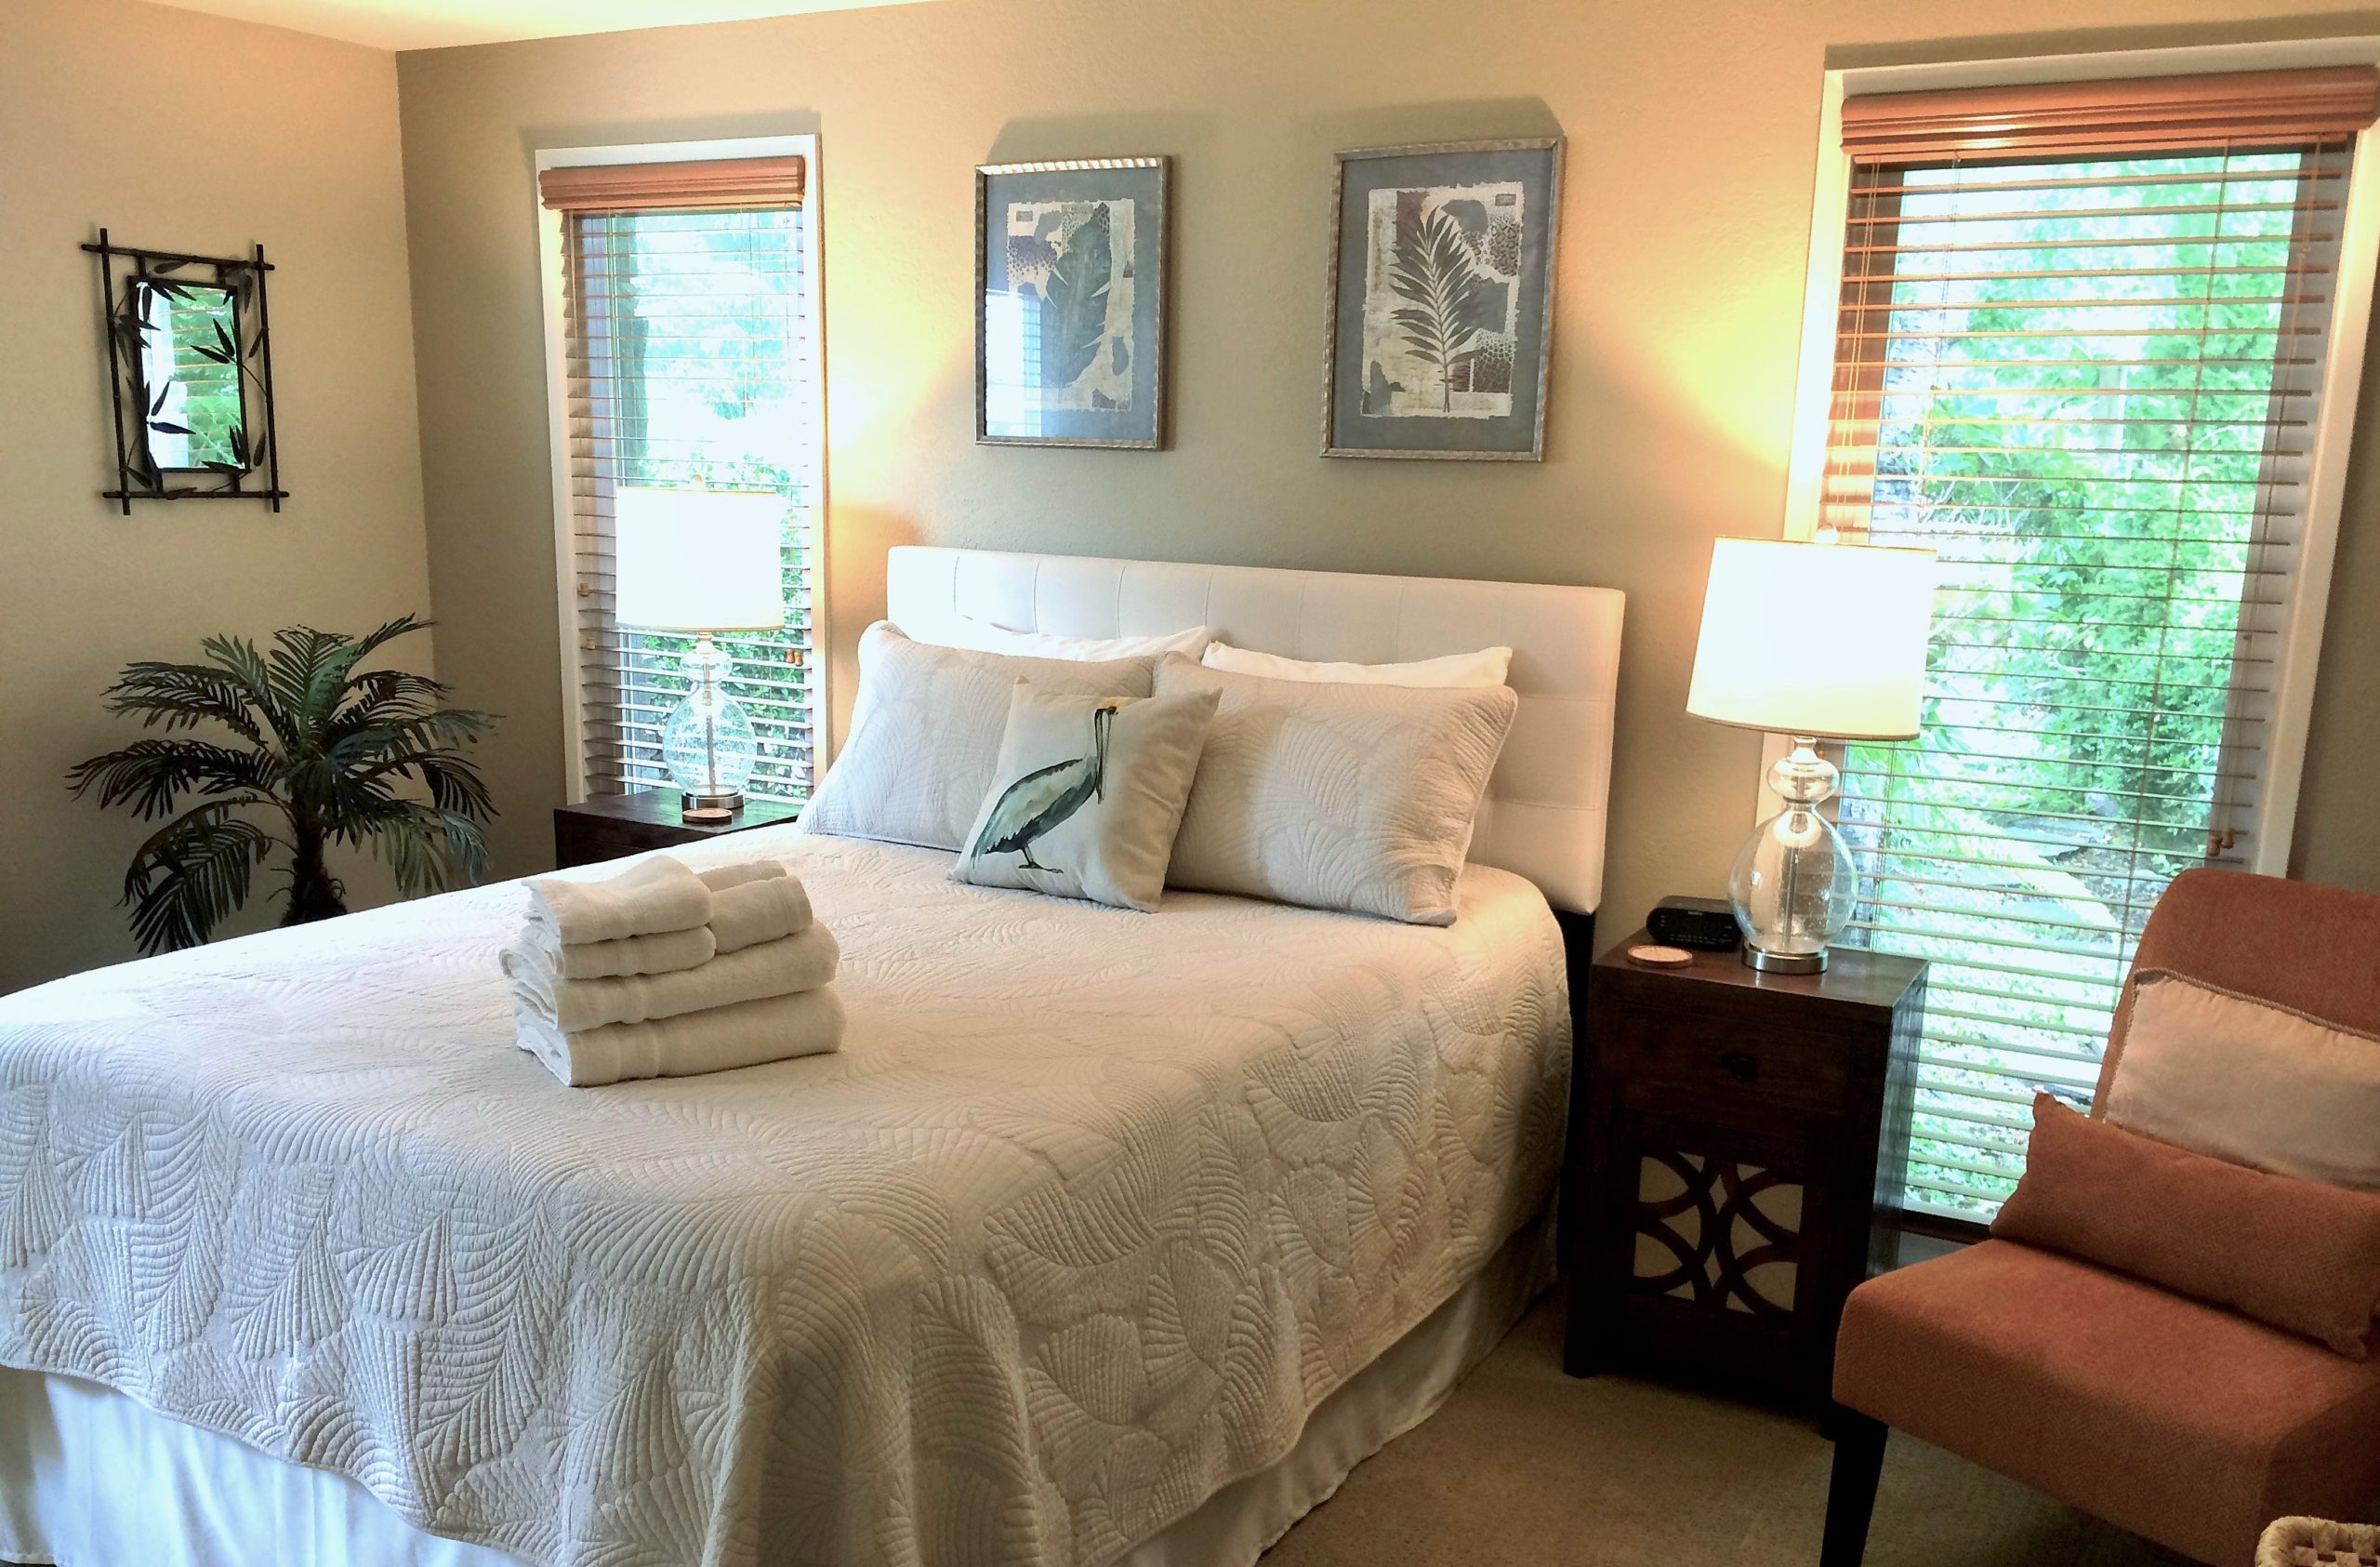 Photo of a bedroom at Pacific Edge - two tall windows overlooking greenery and landscaping